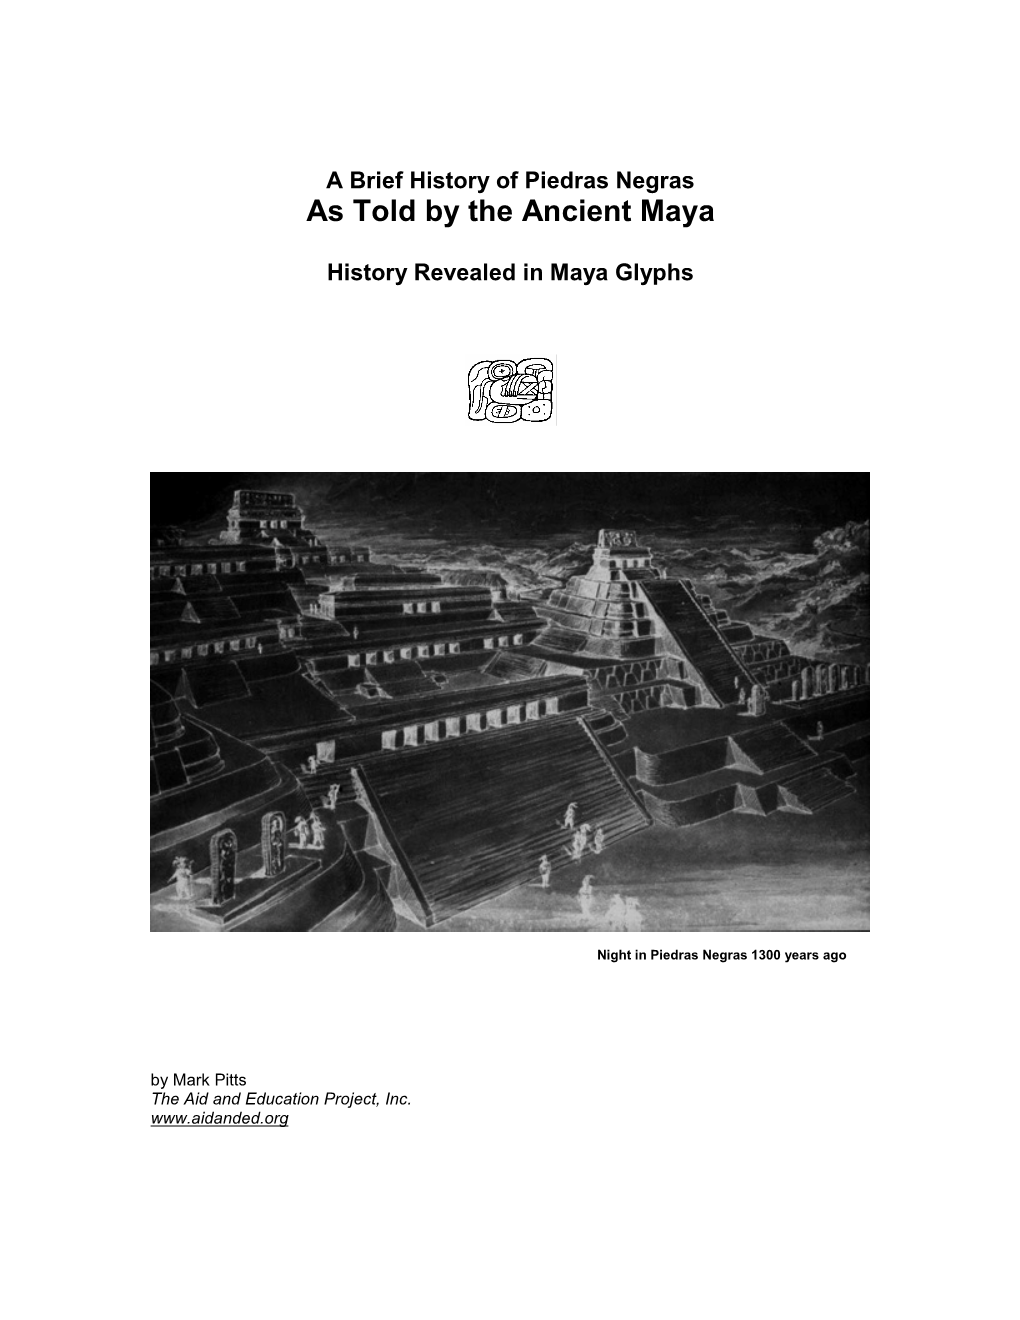 A Brief History of Piedras Negras As Told by the Ancient Maya